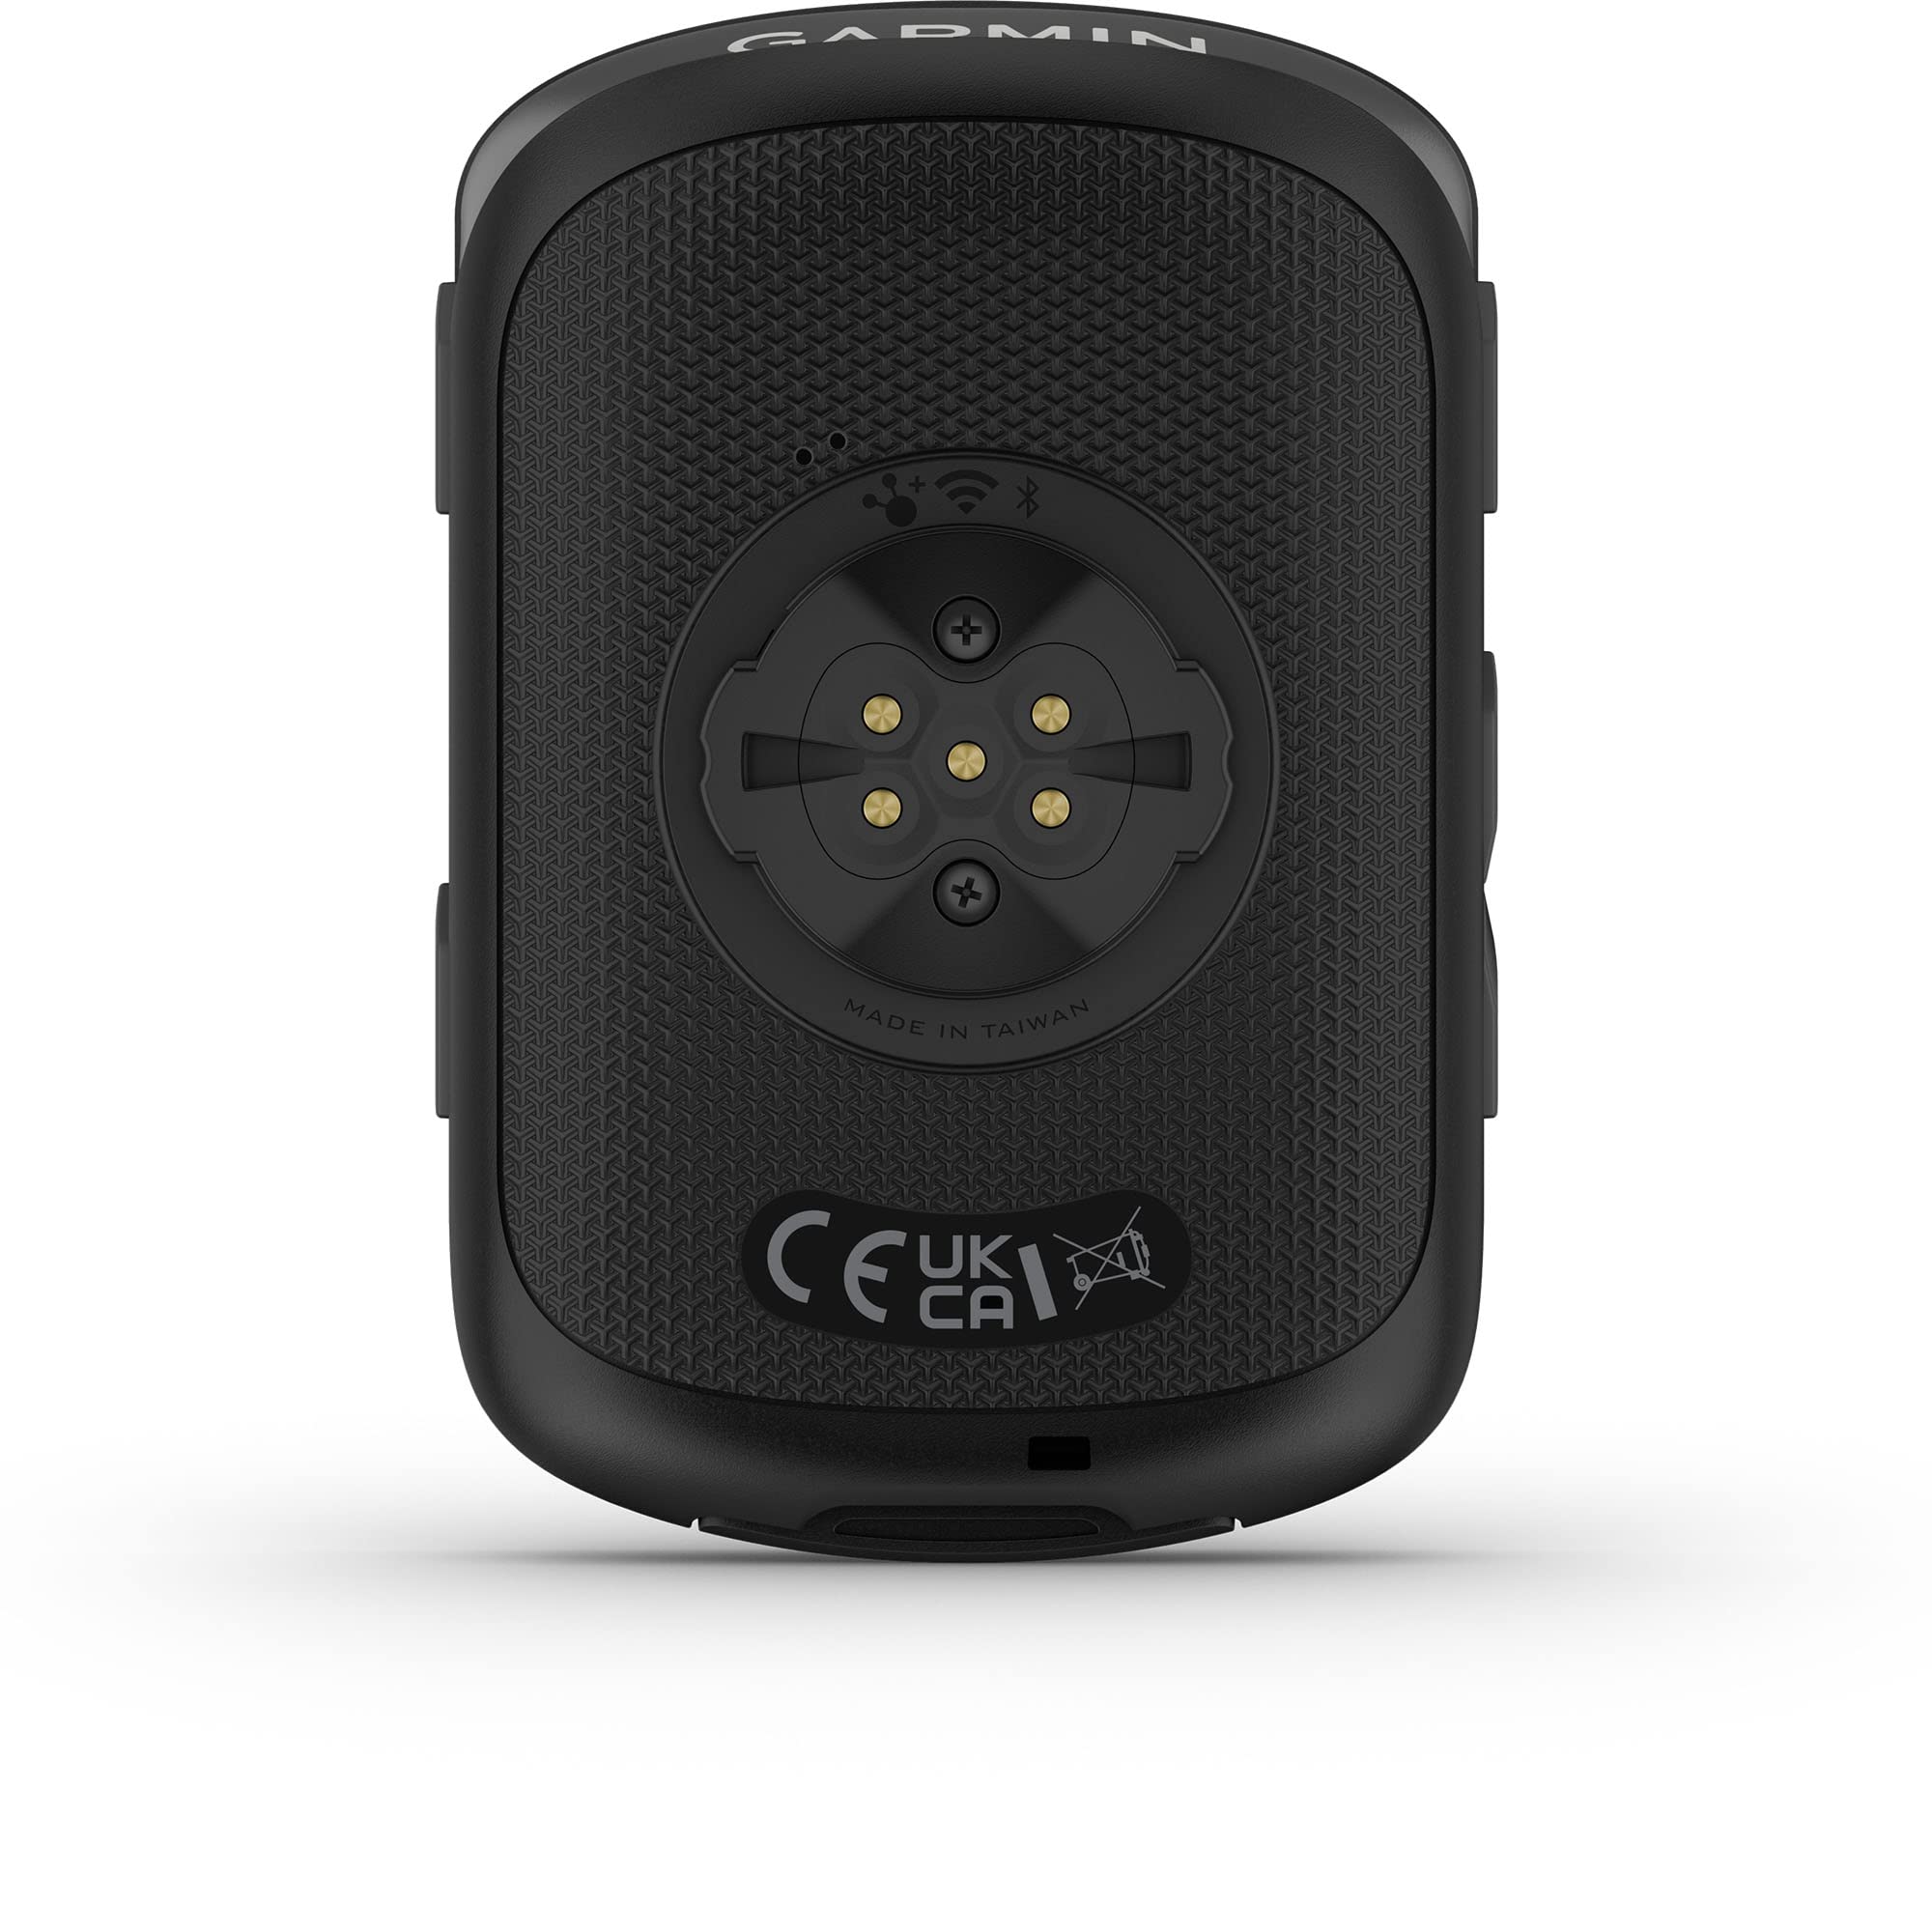 Garmin Edge 840, Compact GPS Cycling Computer with Touchscreen and Buttons, Targeted Adaptive Coaching, Advanced Navigation and More